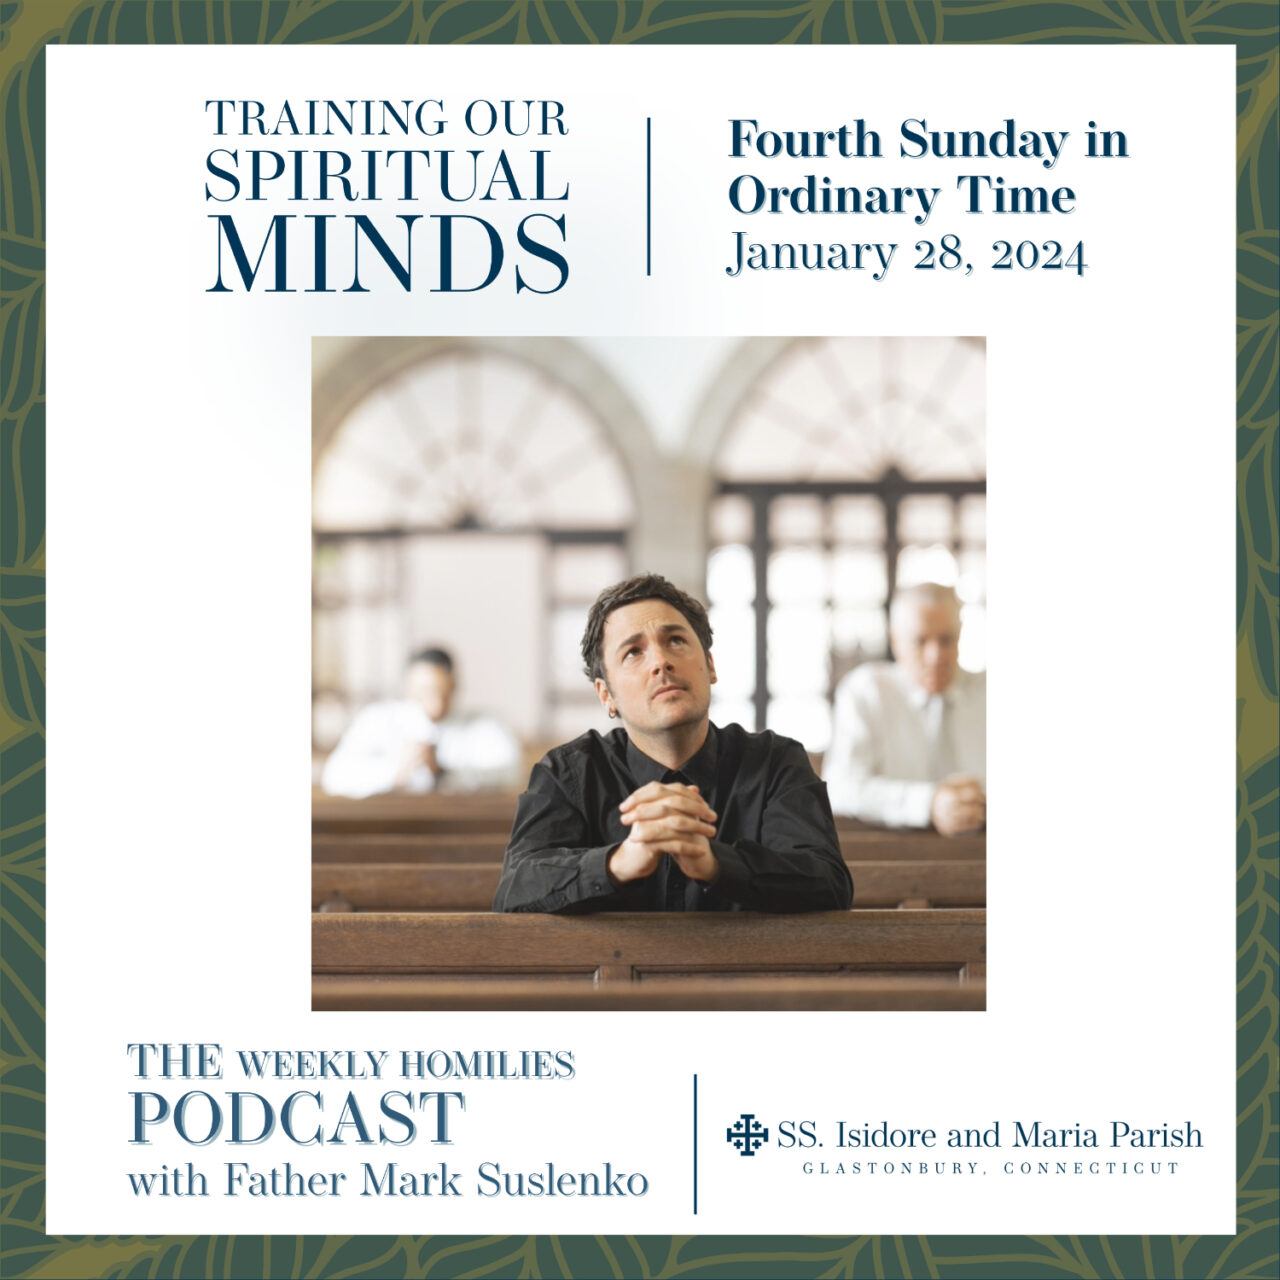 PODCAST: Training Our Spiritual Minds